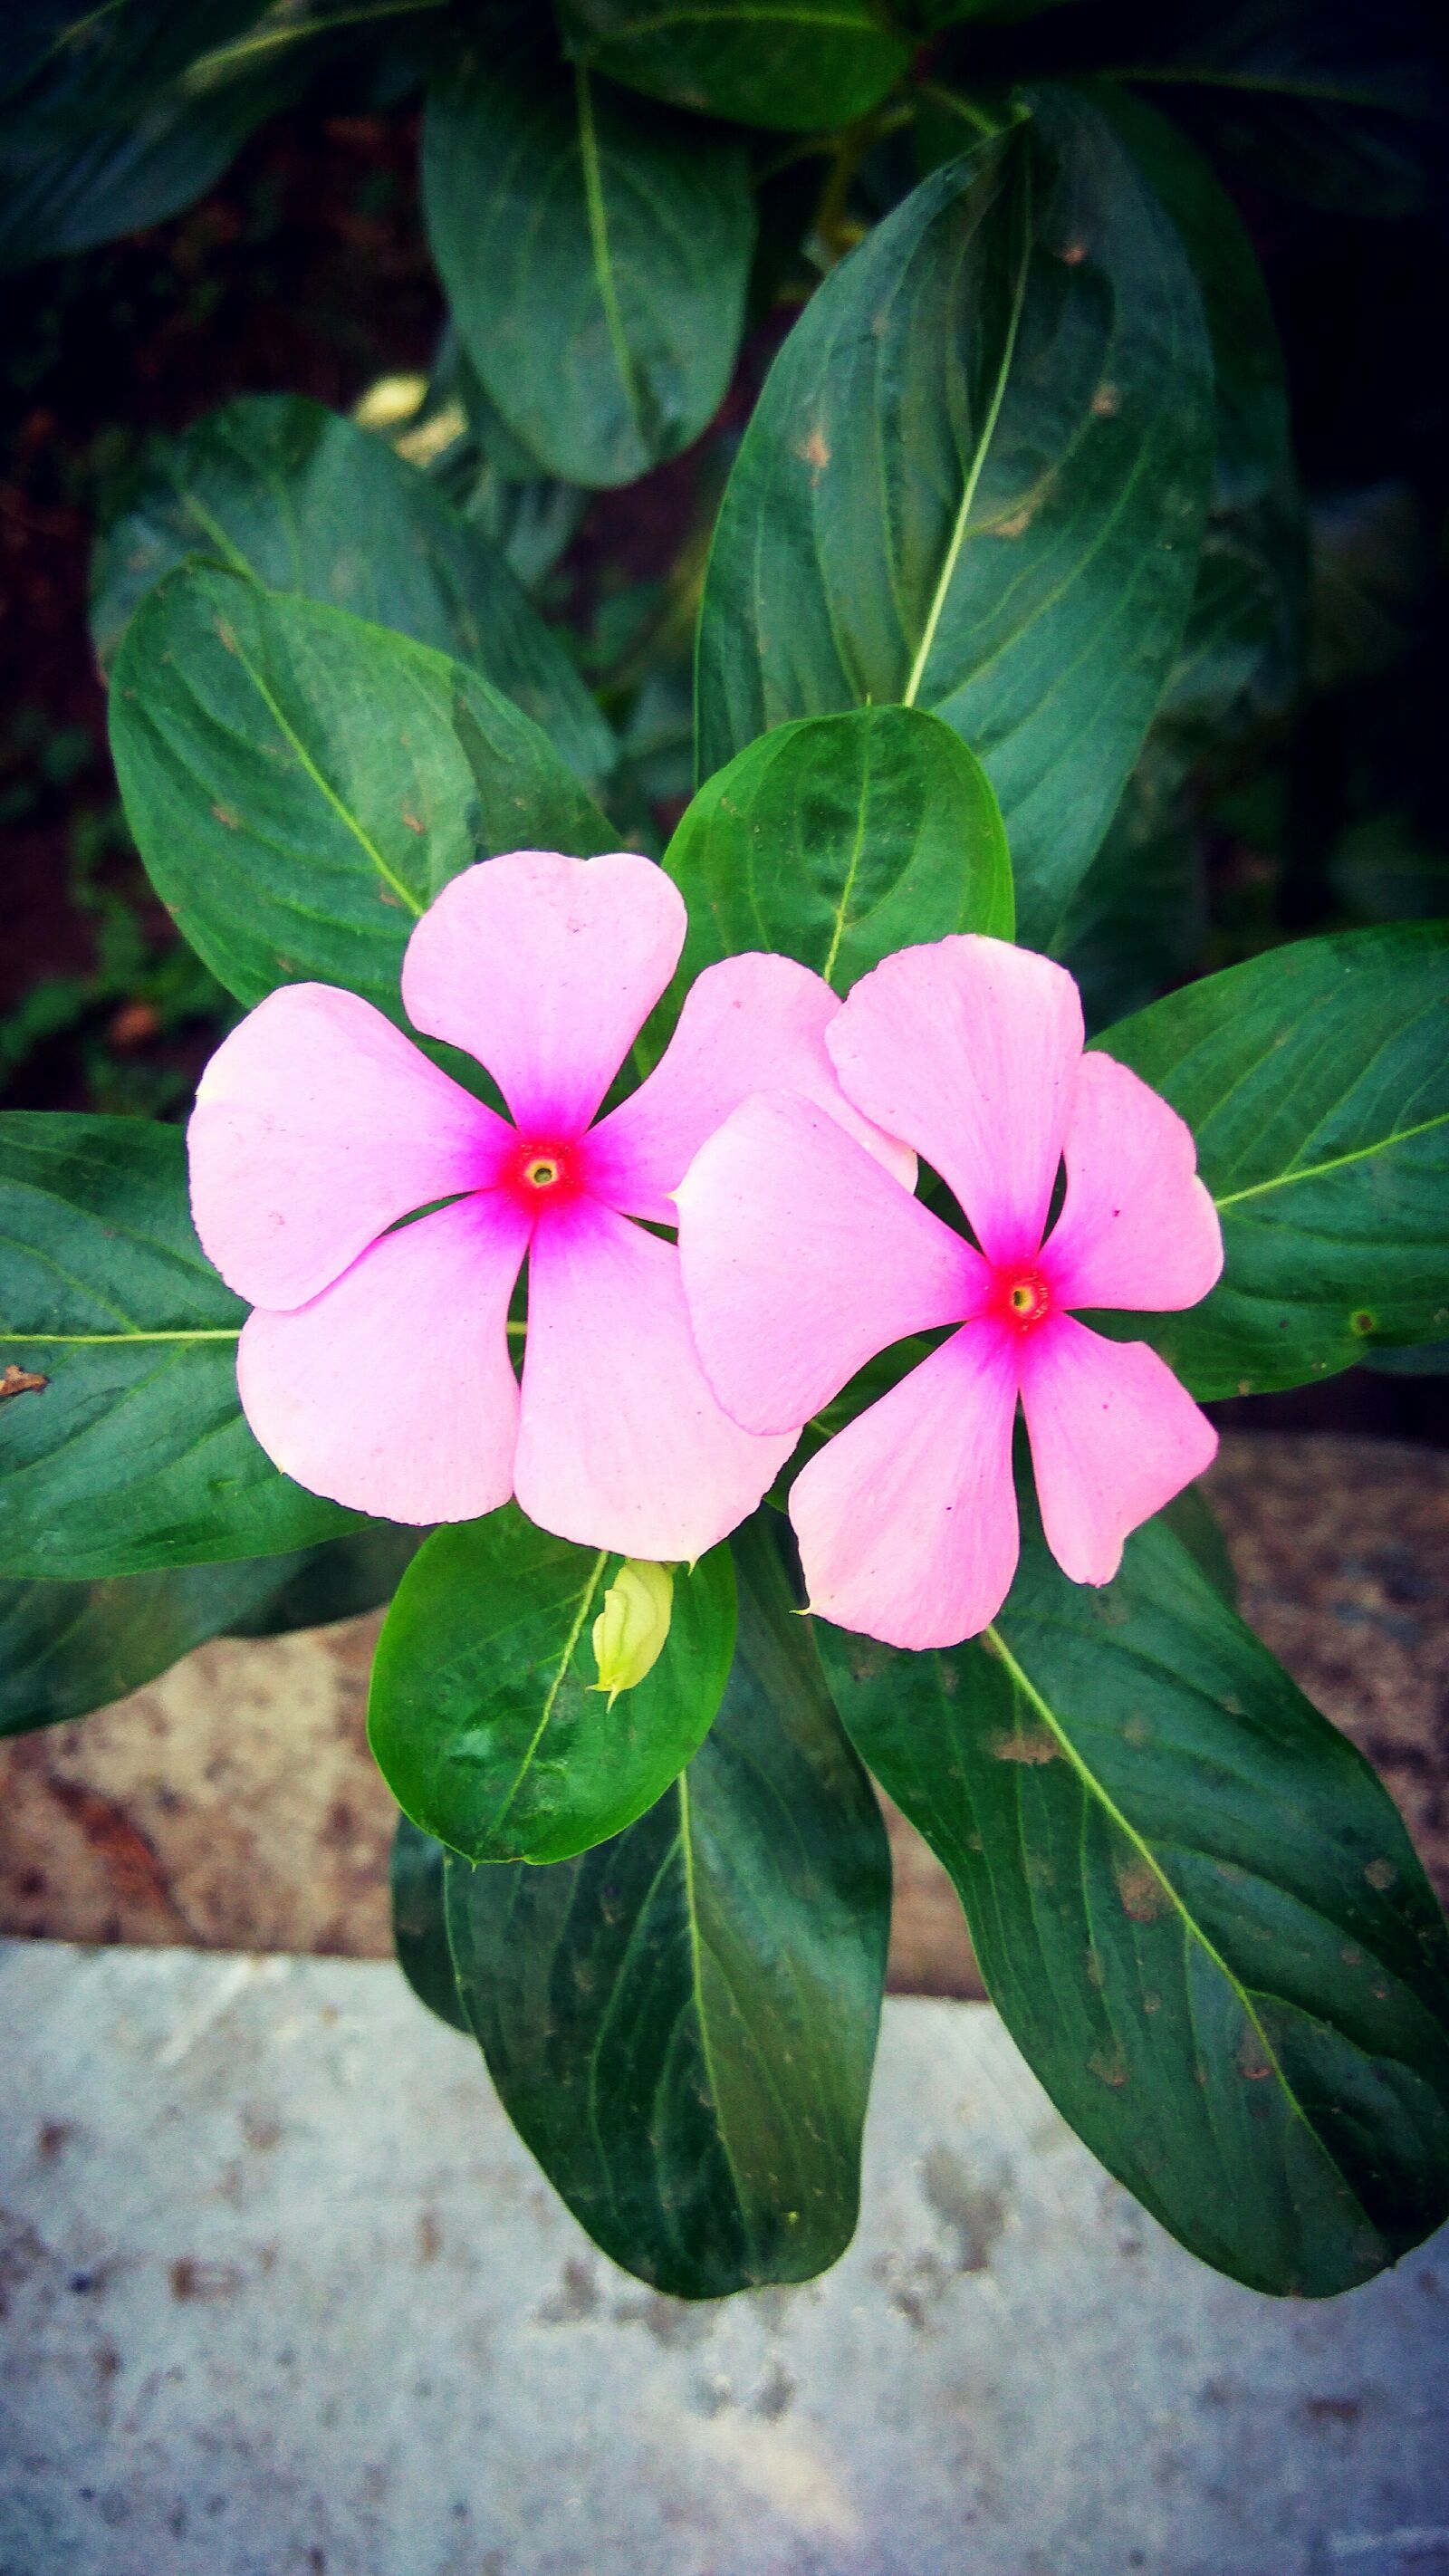 Xiaomi Redmi Note3 sample photo. Beautiful, flowers, nature, photography photography